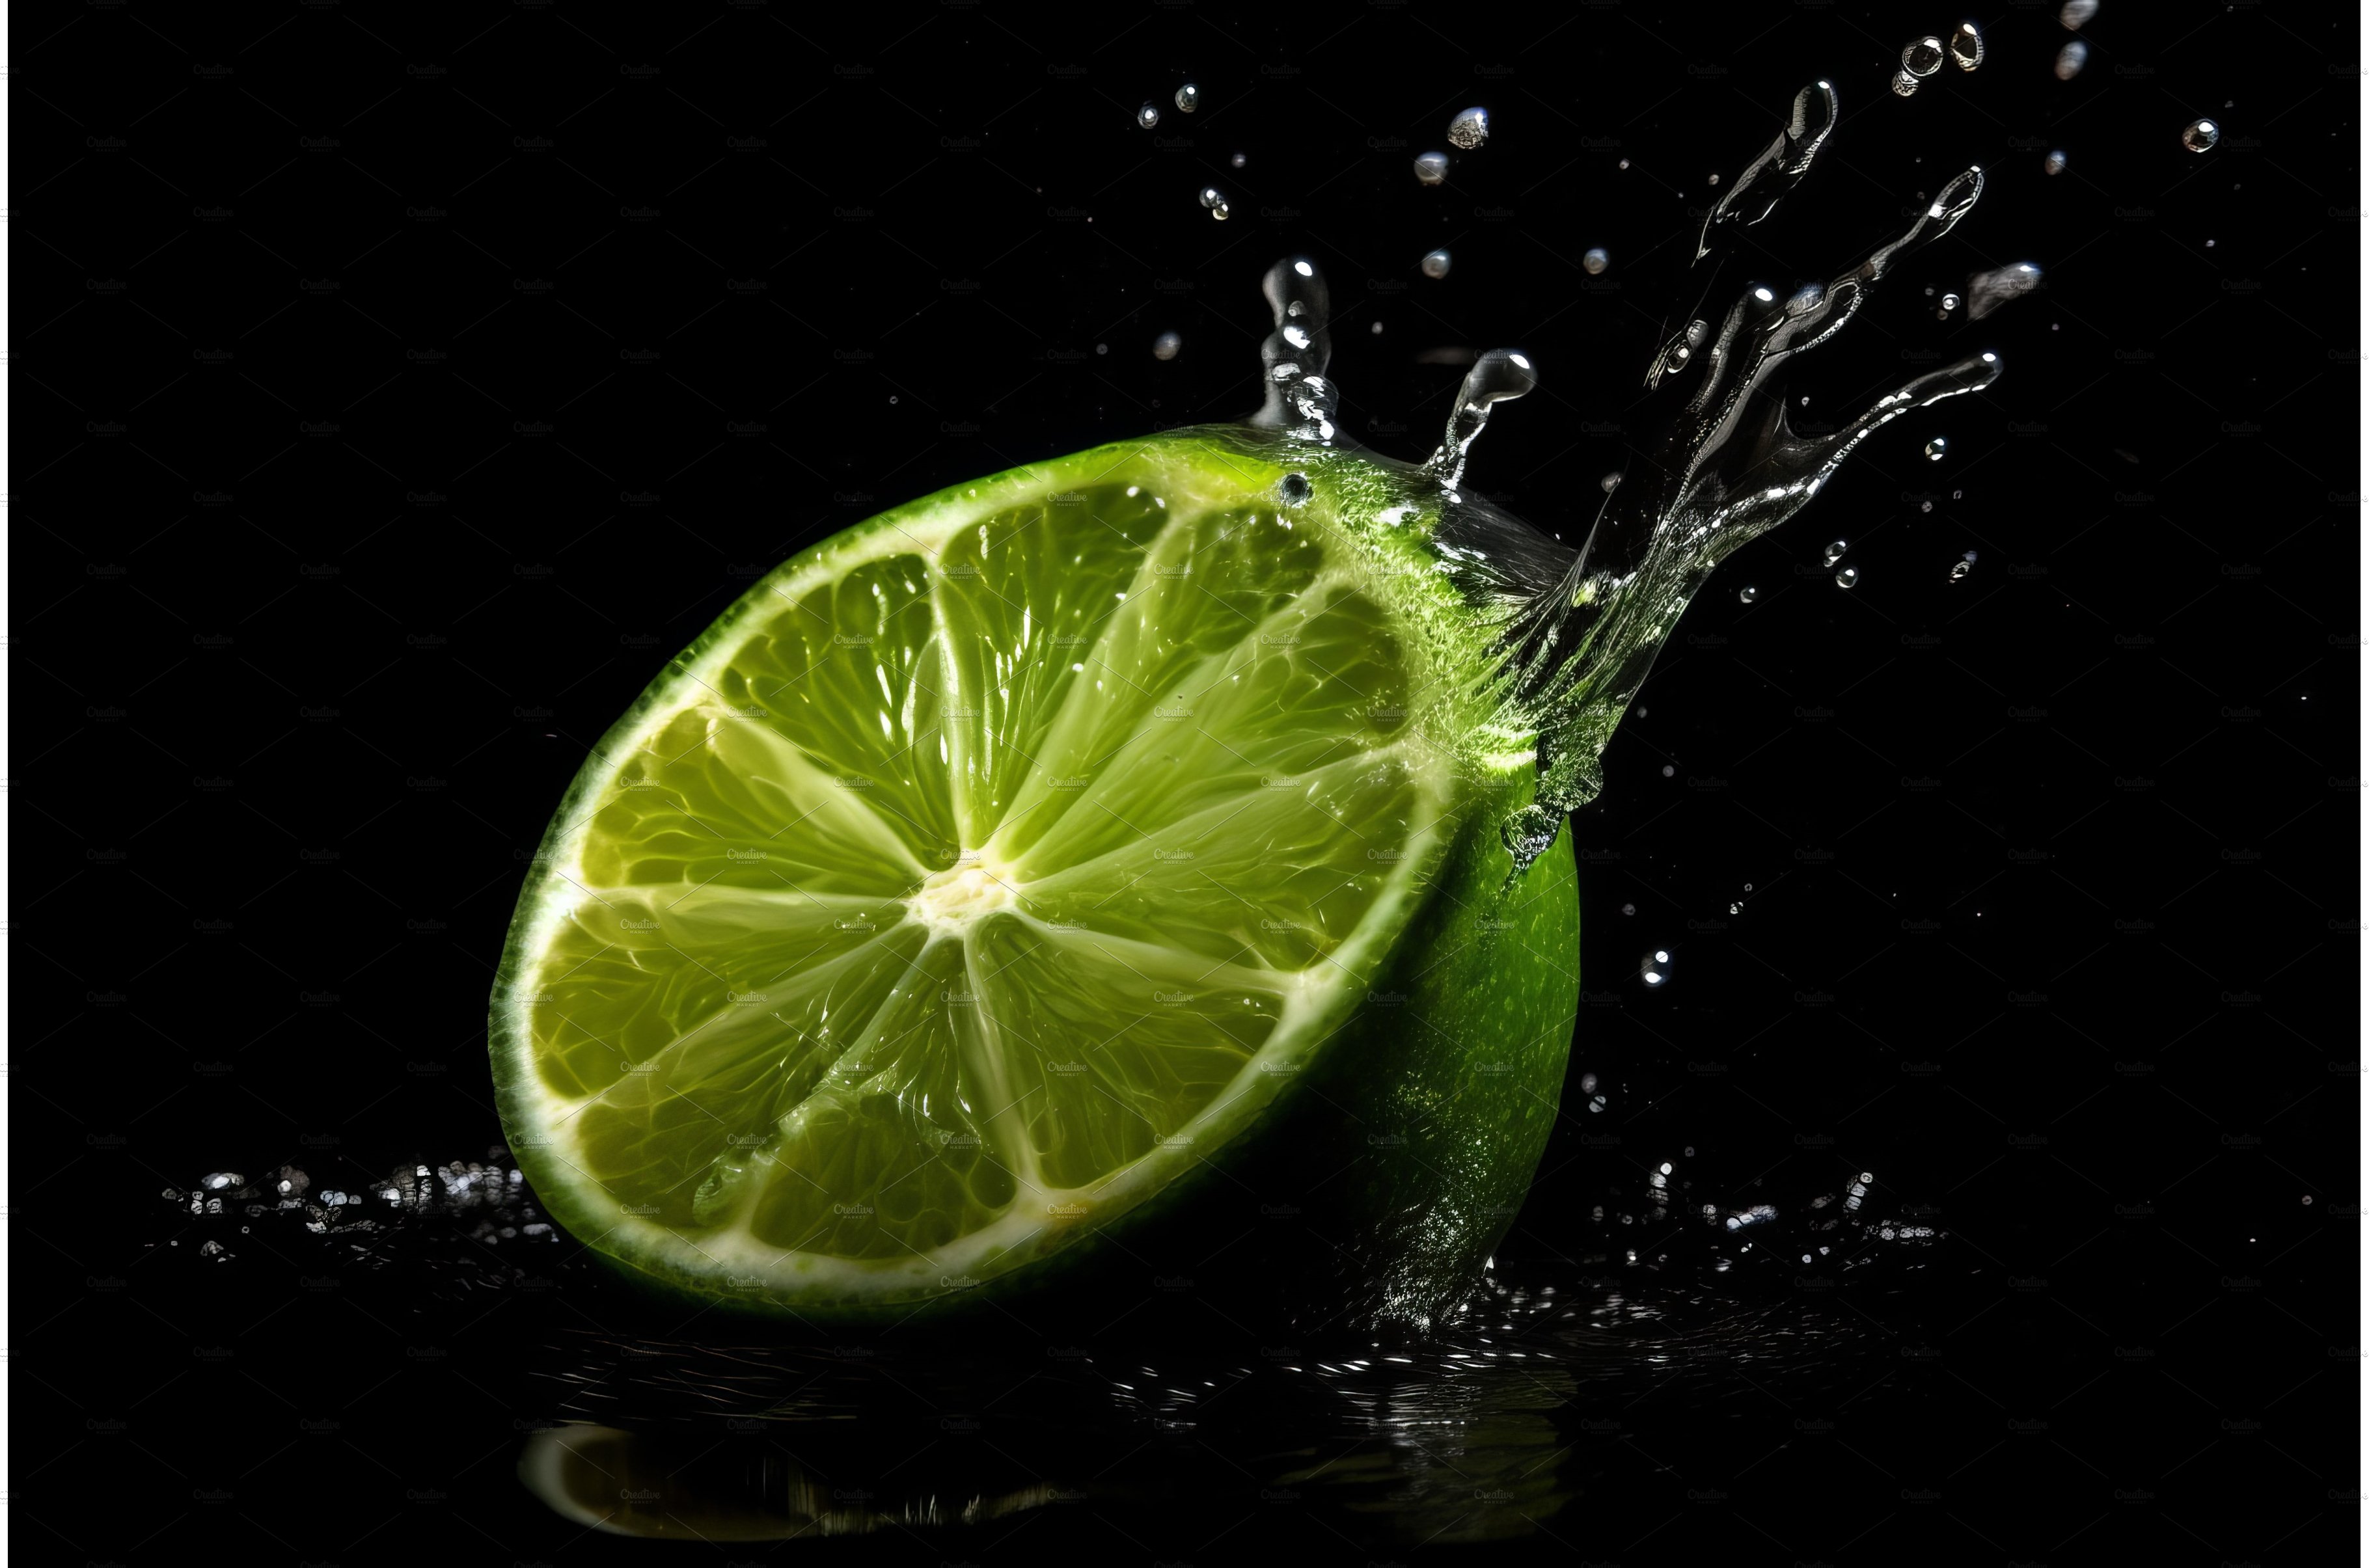 Lime on black background cover image.